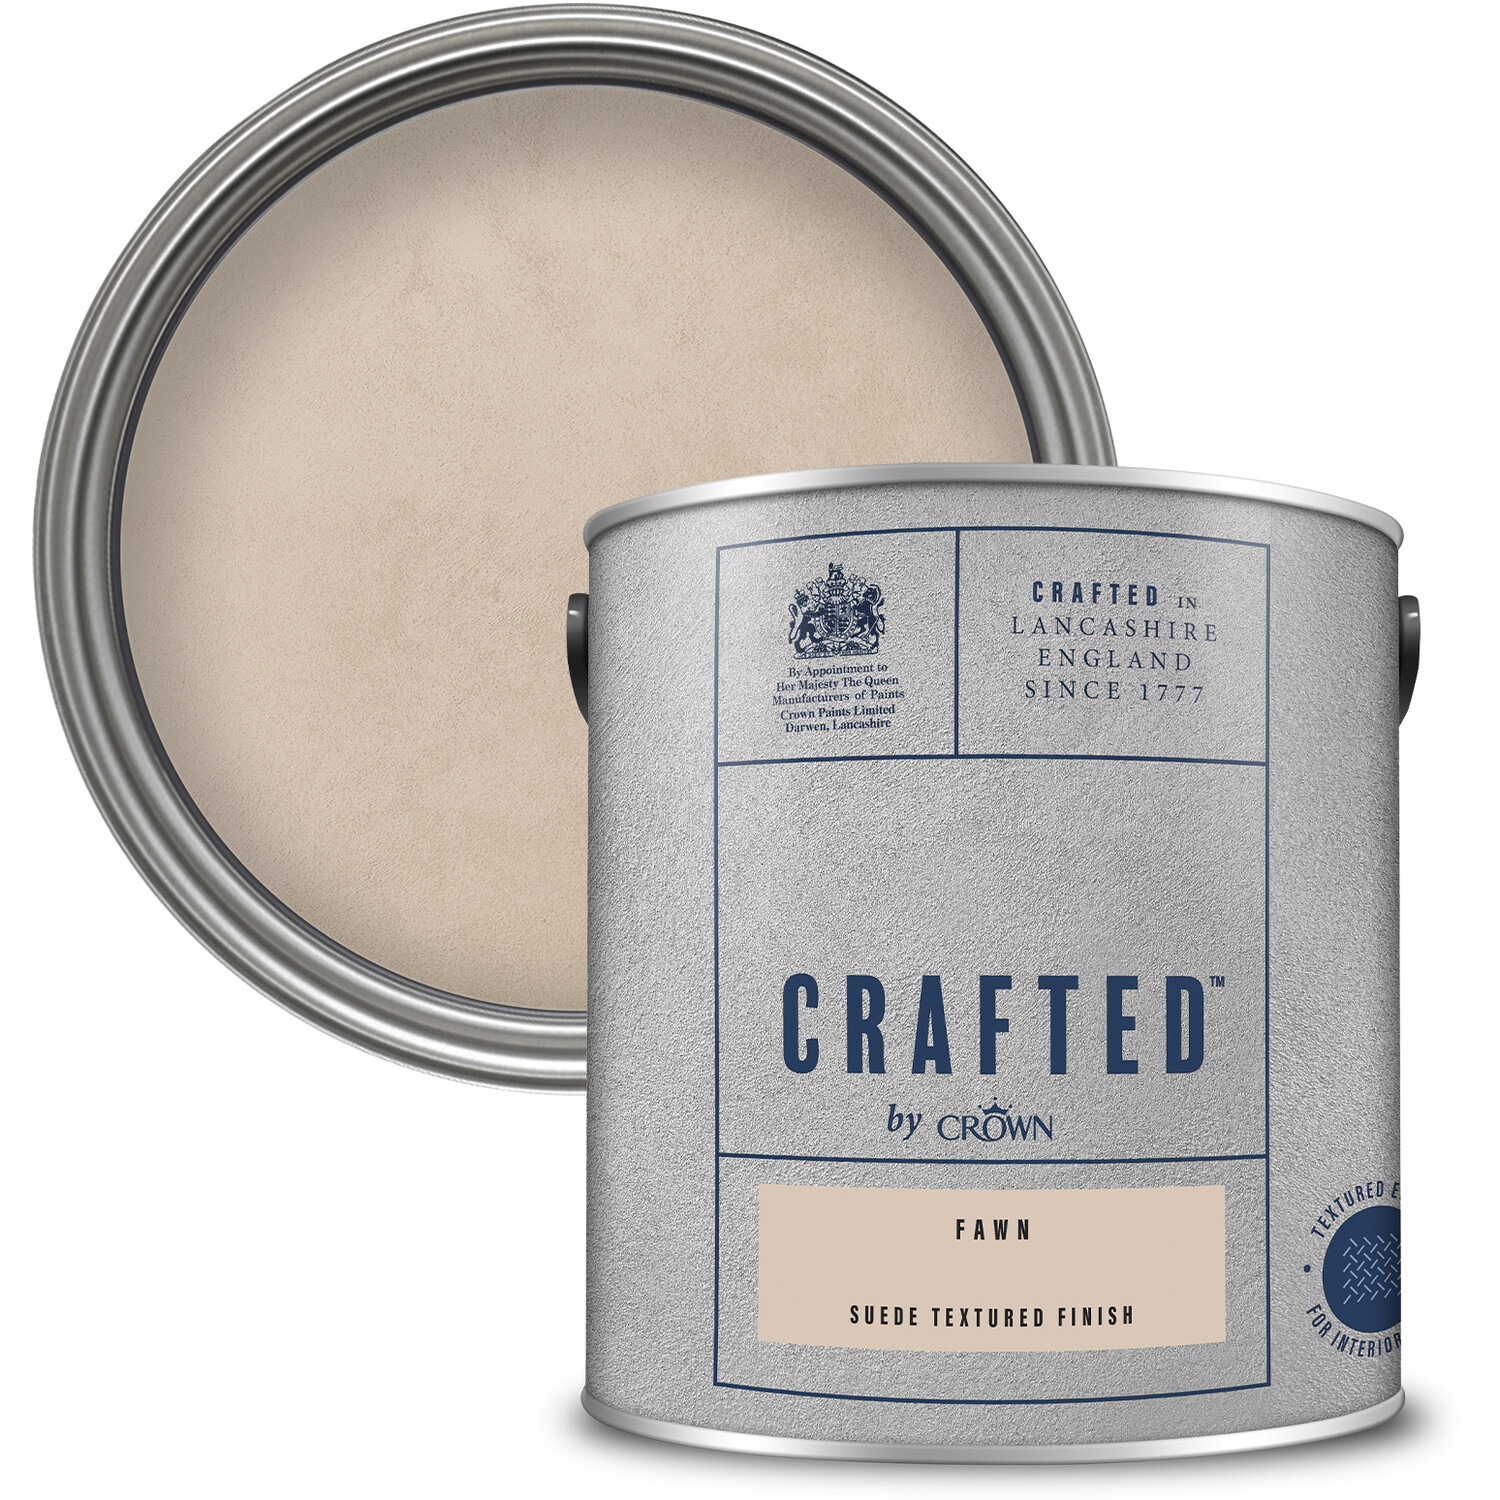 Crown Crafted Walls Fawn Suede Textured Finish Paint 2.5L Image 5